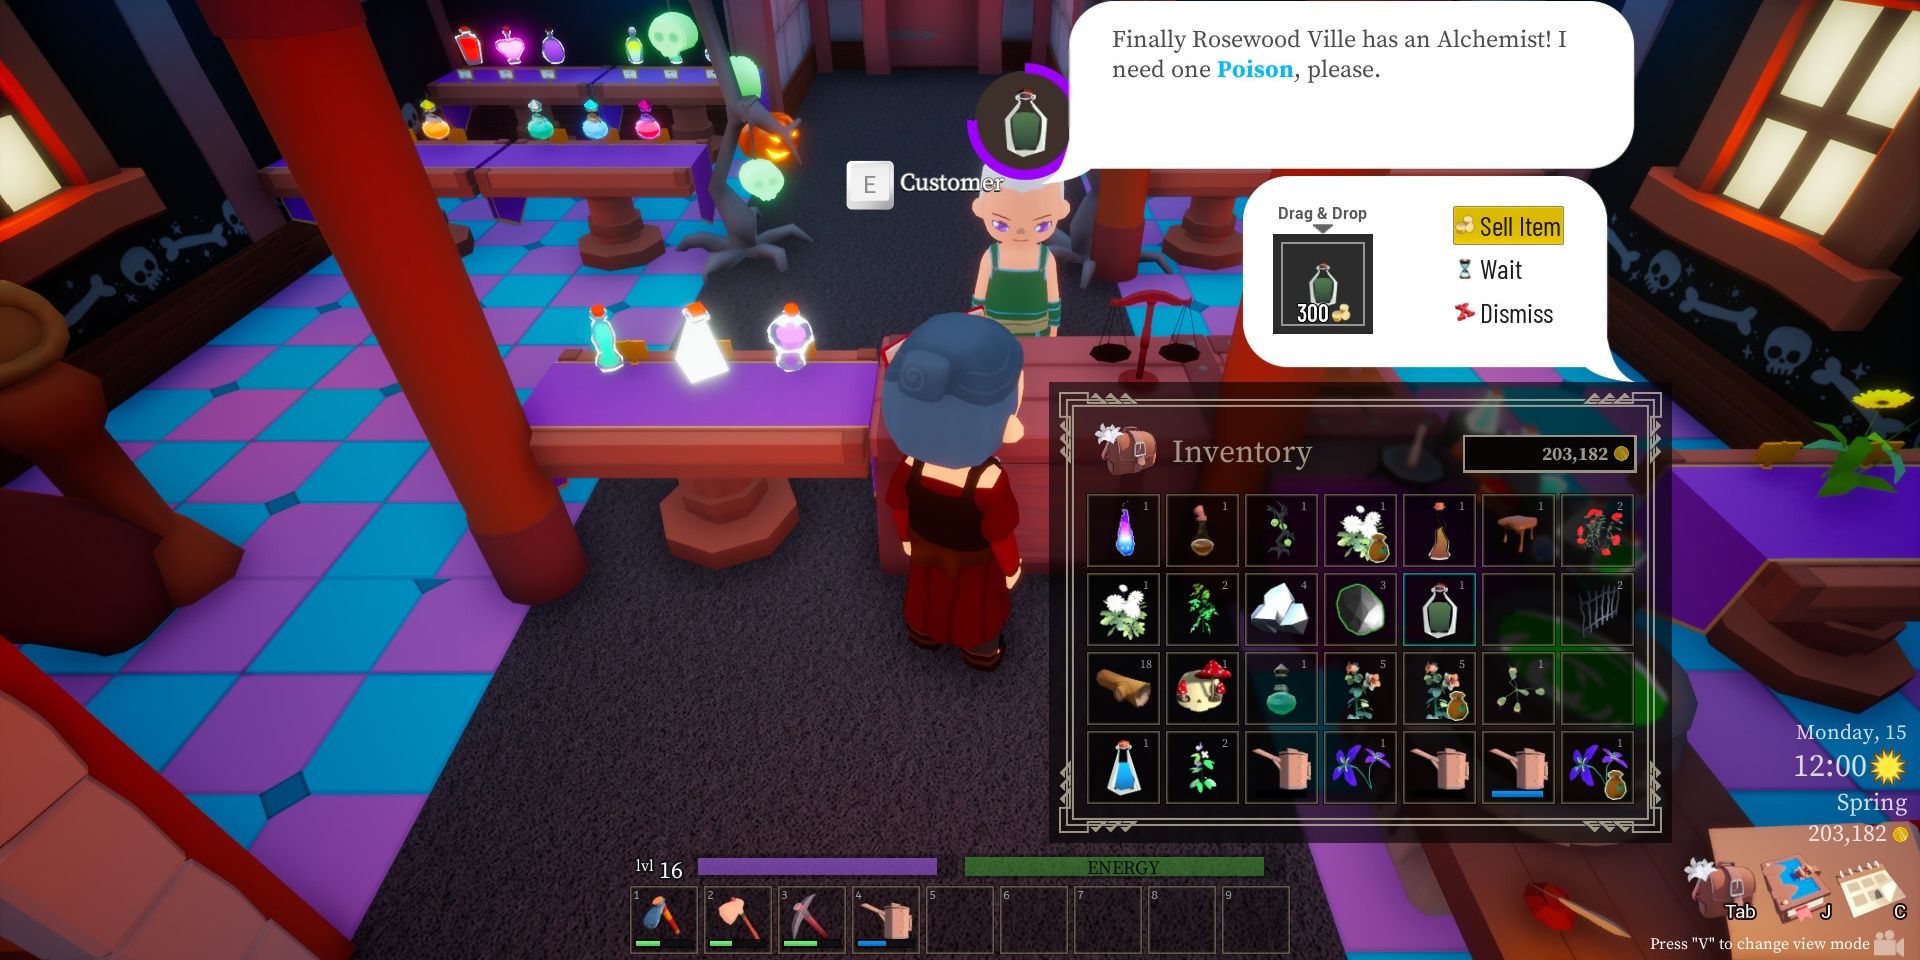 A client asking the alchemist for a poison in Alchemy Garden